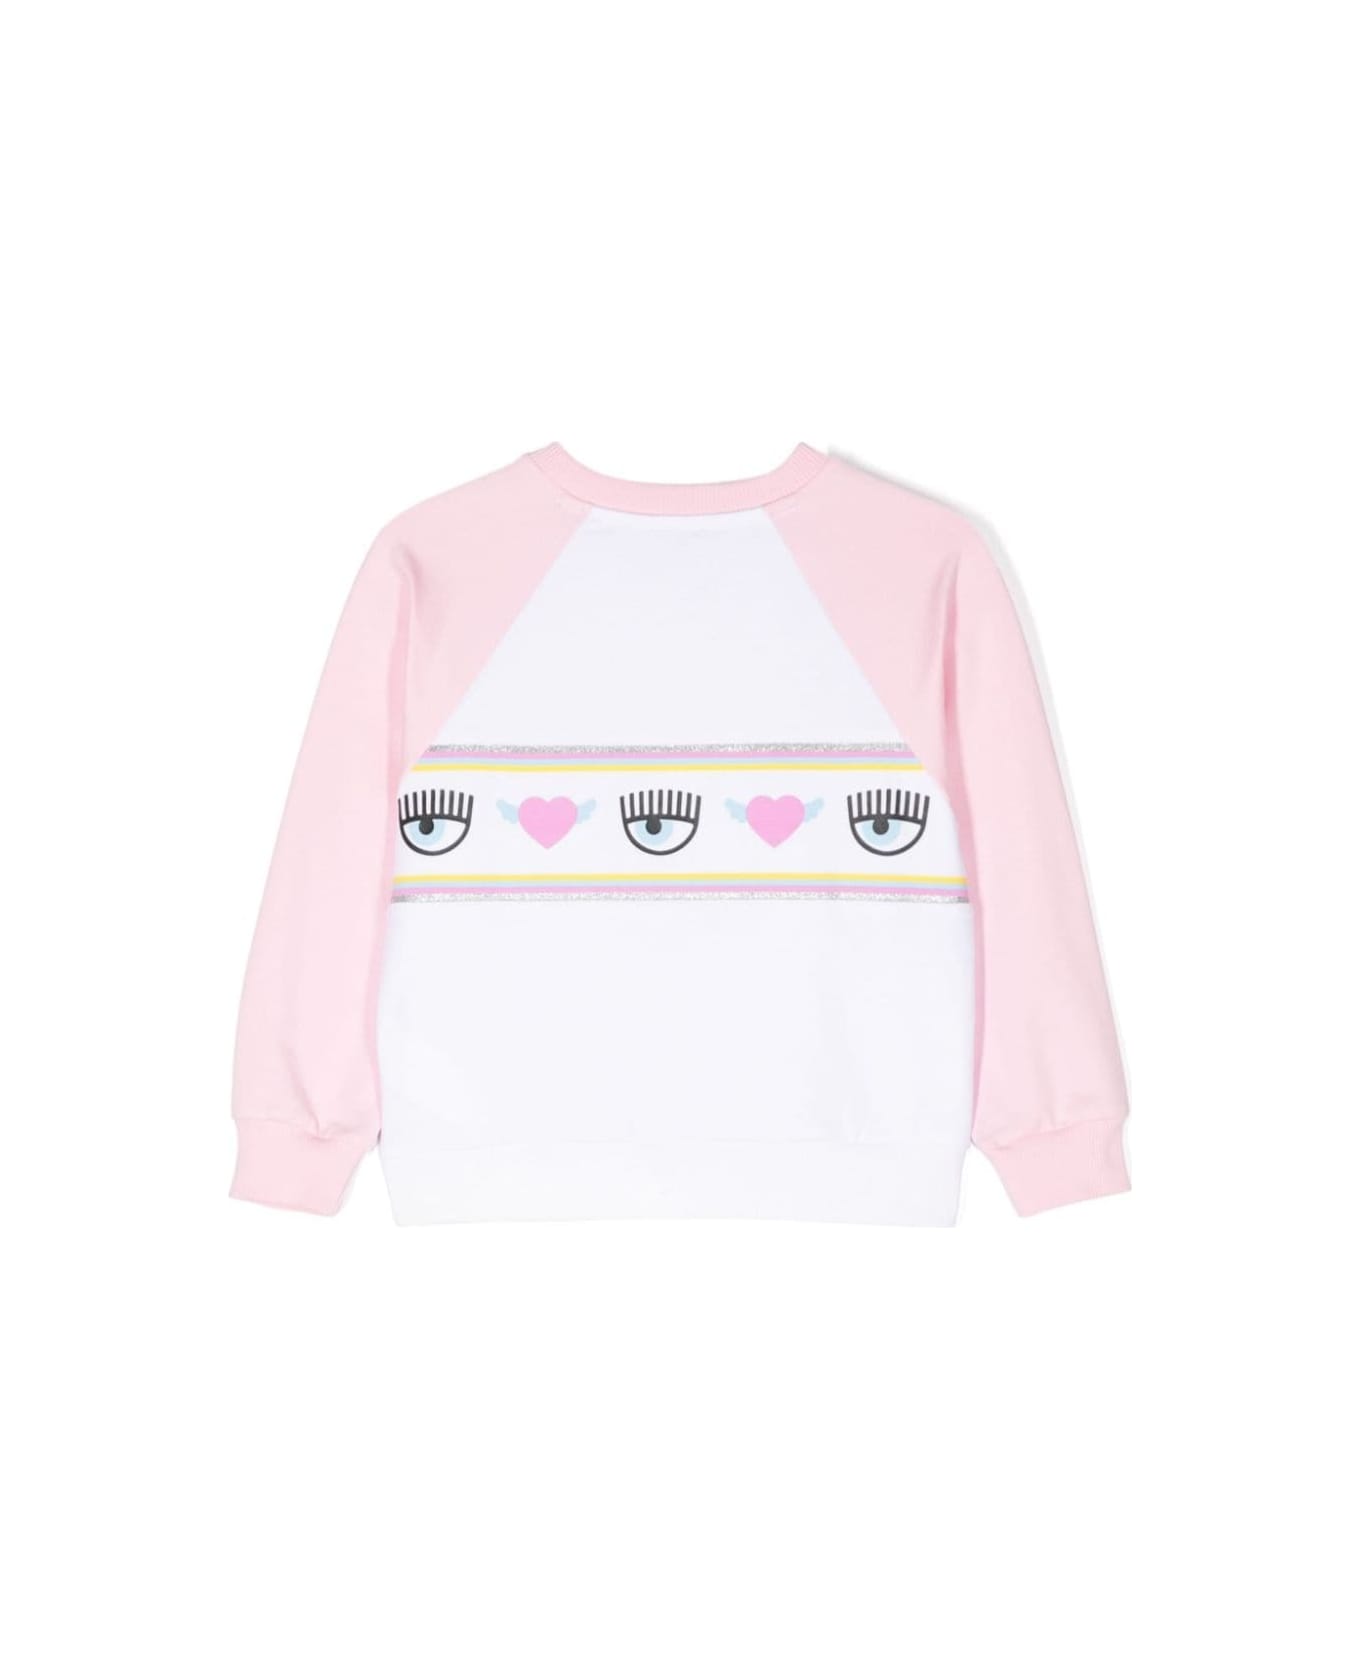 Chiara Ferragni Pink And White Sweatshirt With Branded Band In Cotton Blend Girl - White